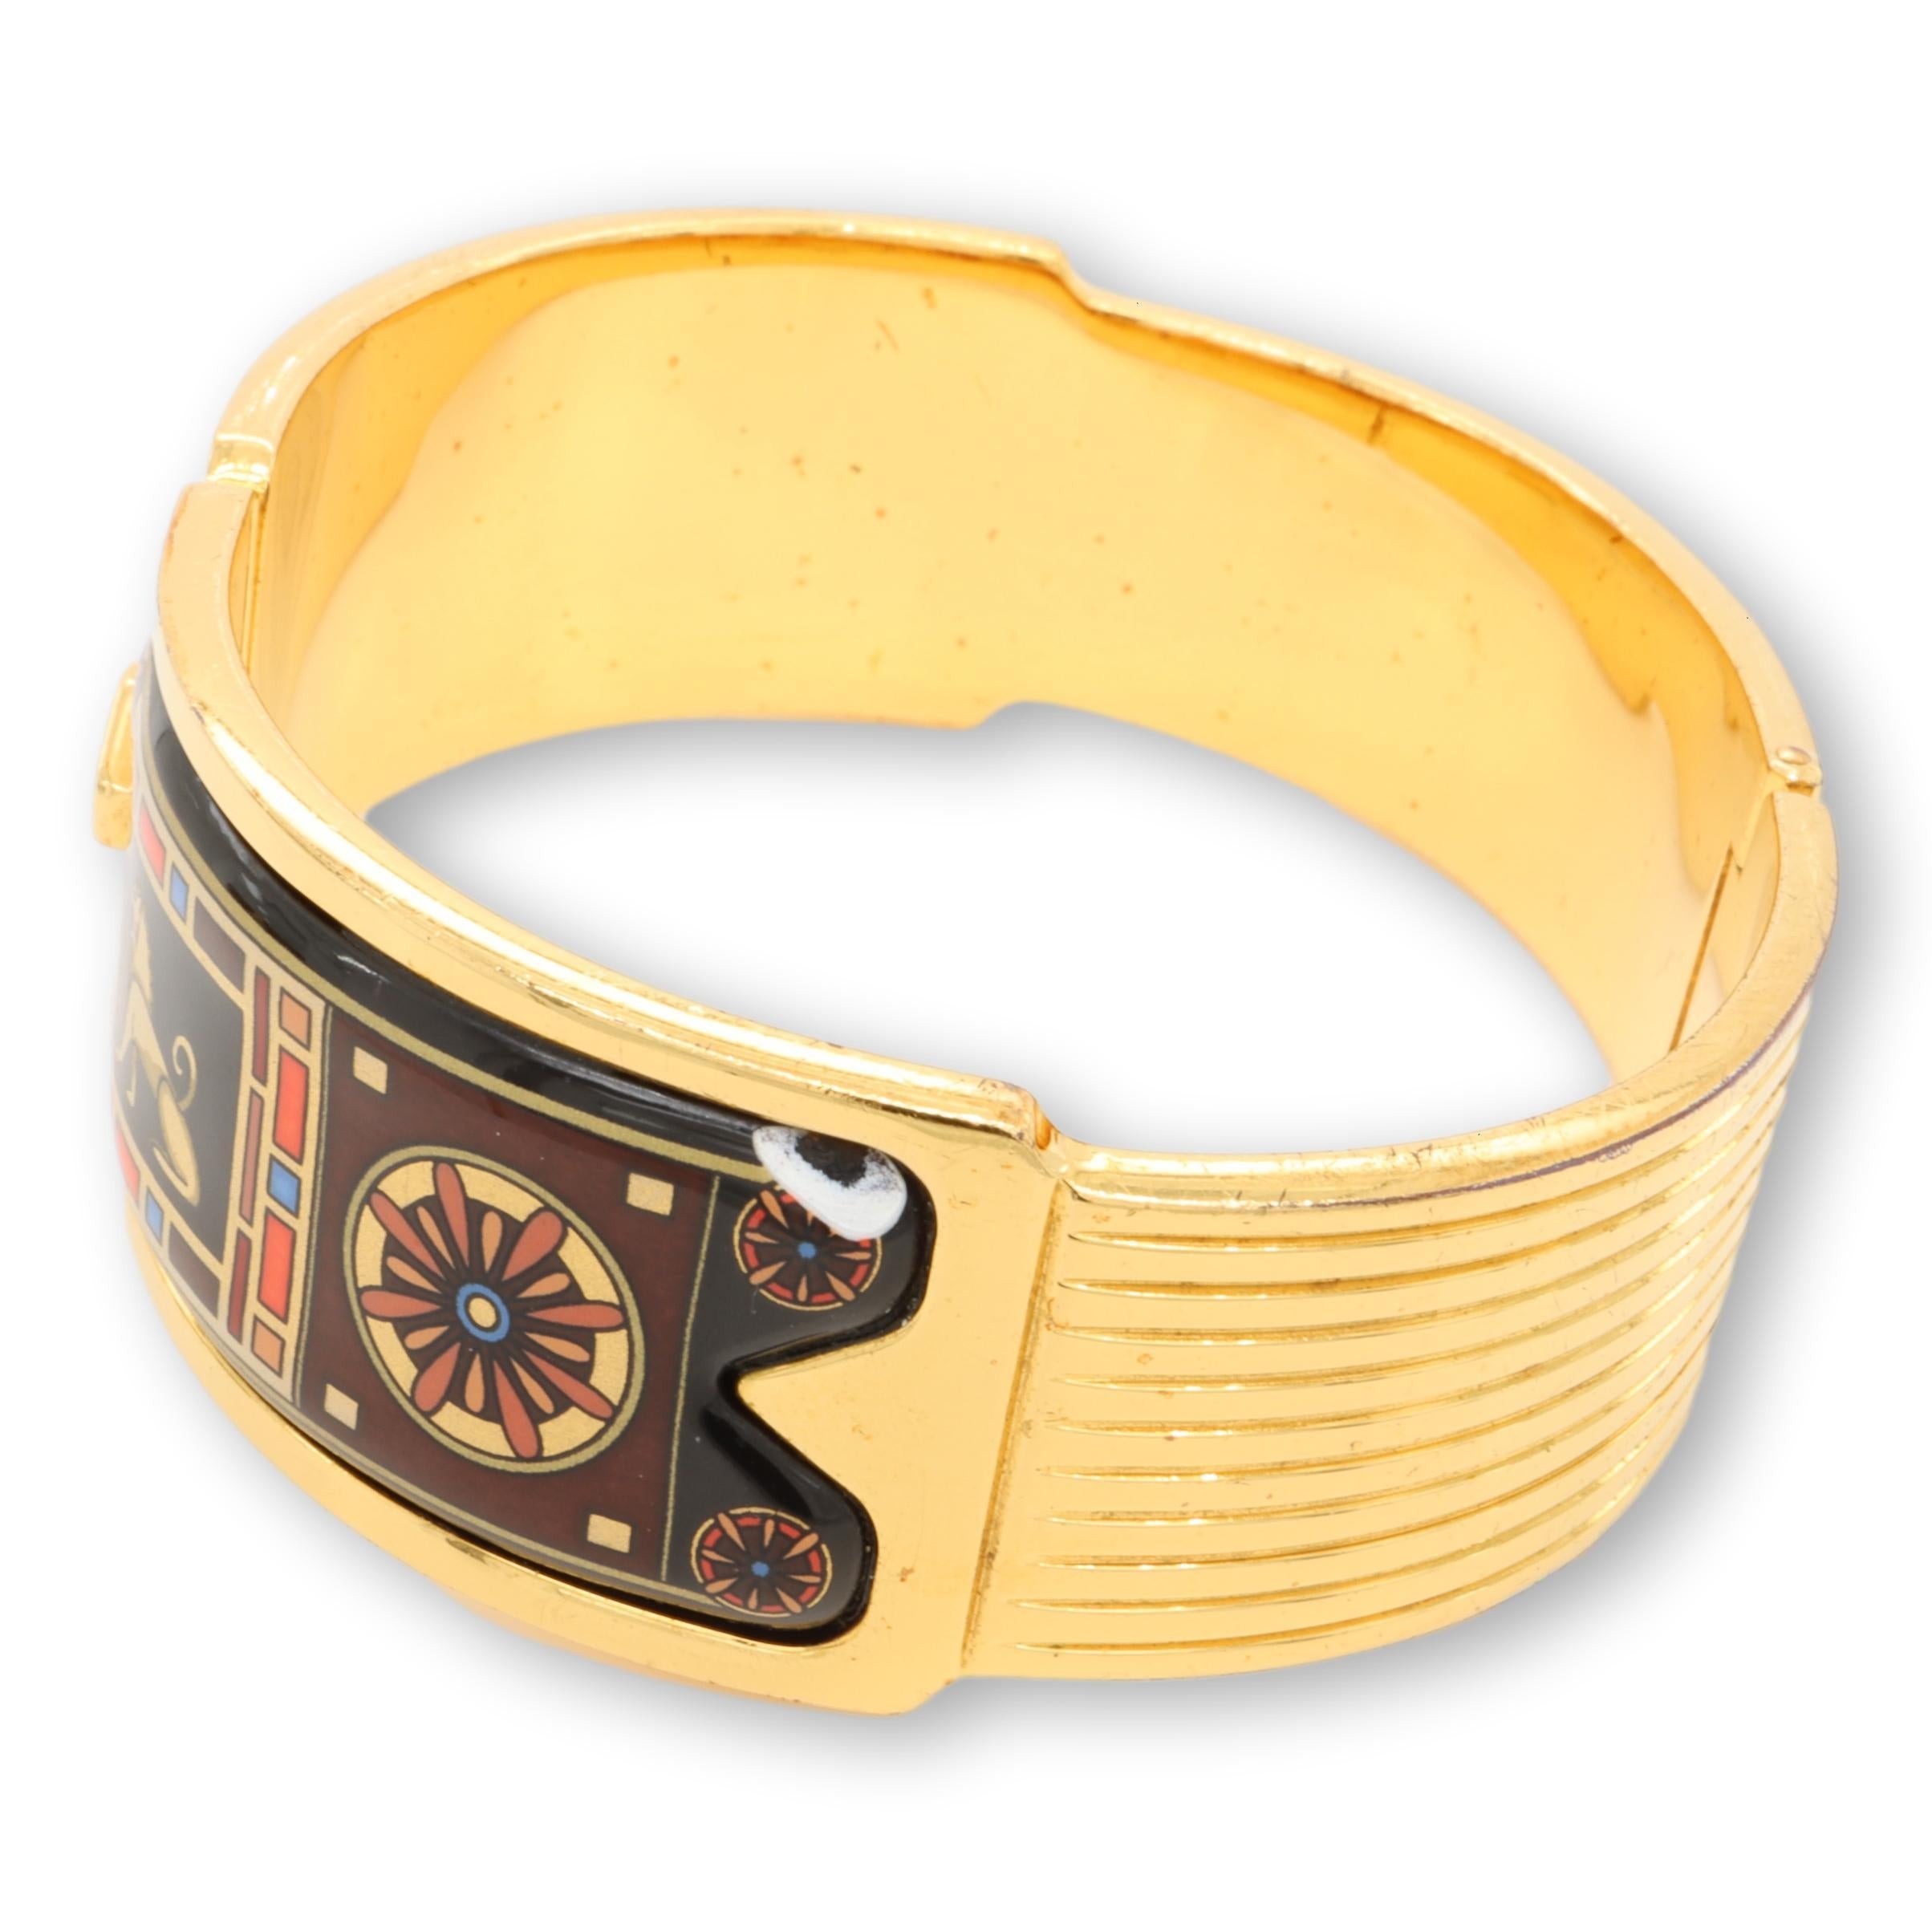 Vintage Bangle bracelet designed by Michaela Frey Wien finely plated in 24 karat gold fill with a colorful mix of enamel with a gold lion design with black blue, red and orange patterns. Measures  6 1/2